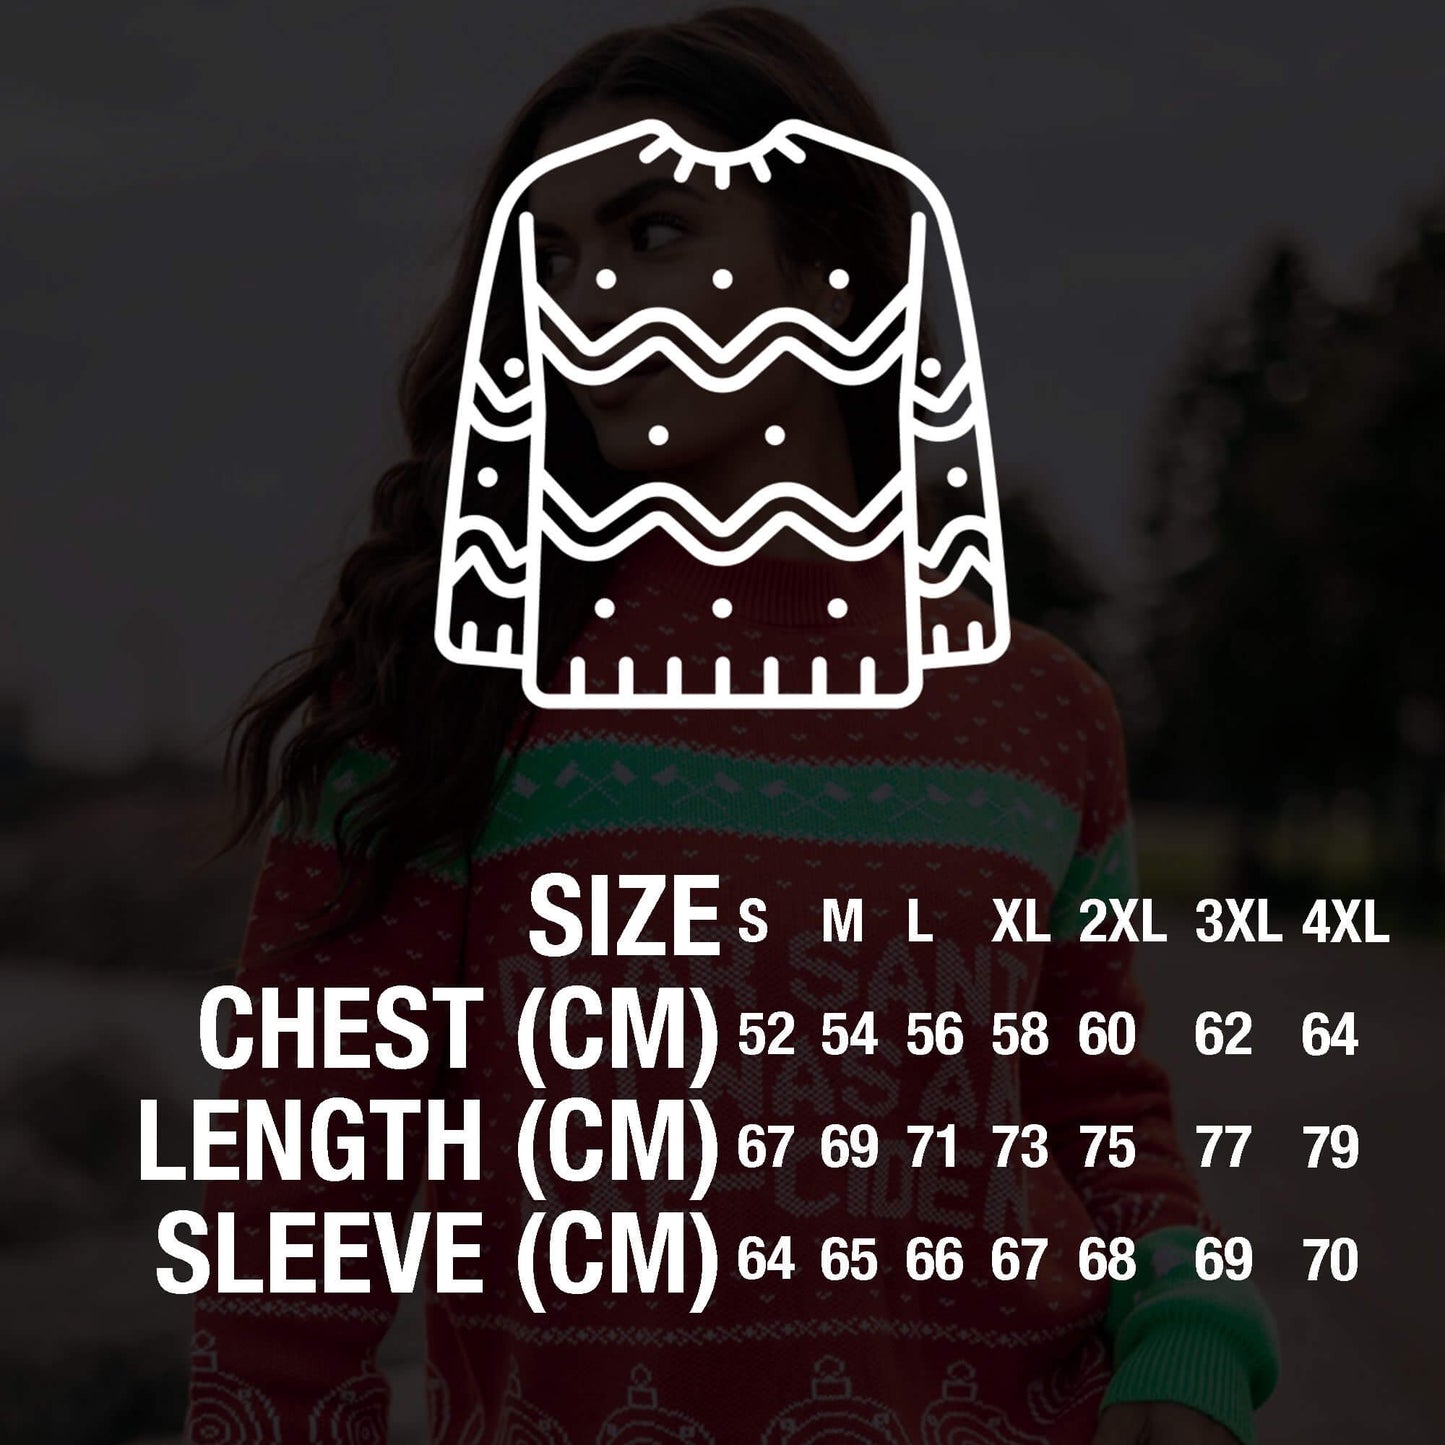 World Axe Throwing League Christmas Sweater Size Chart